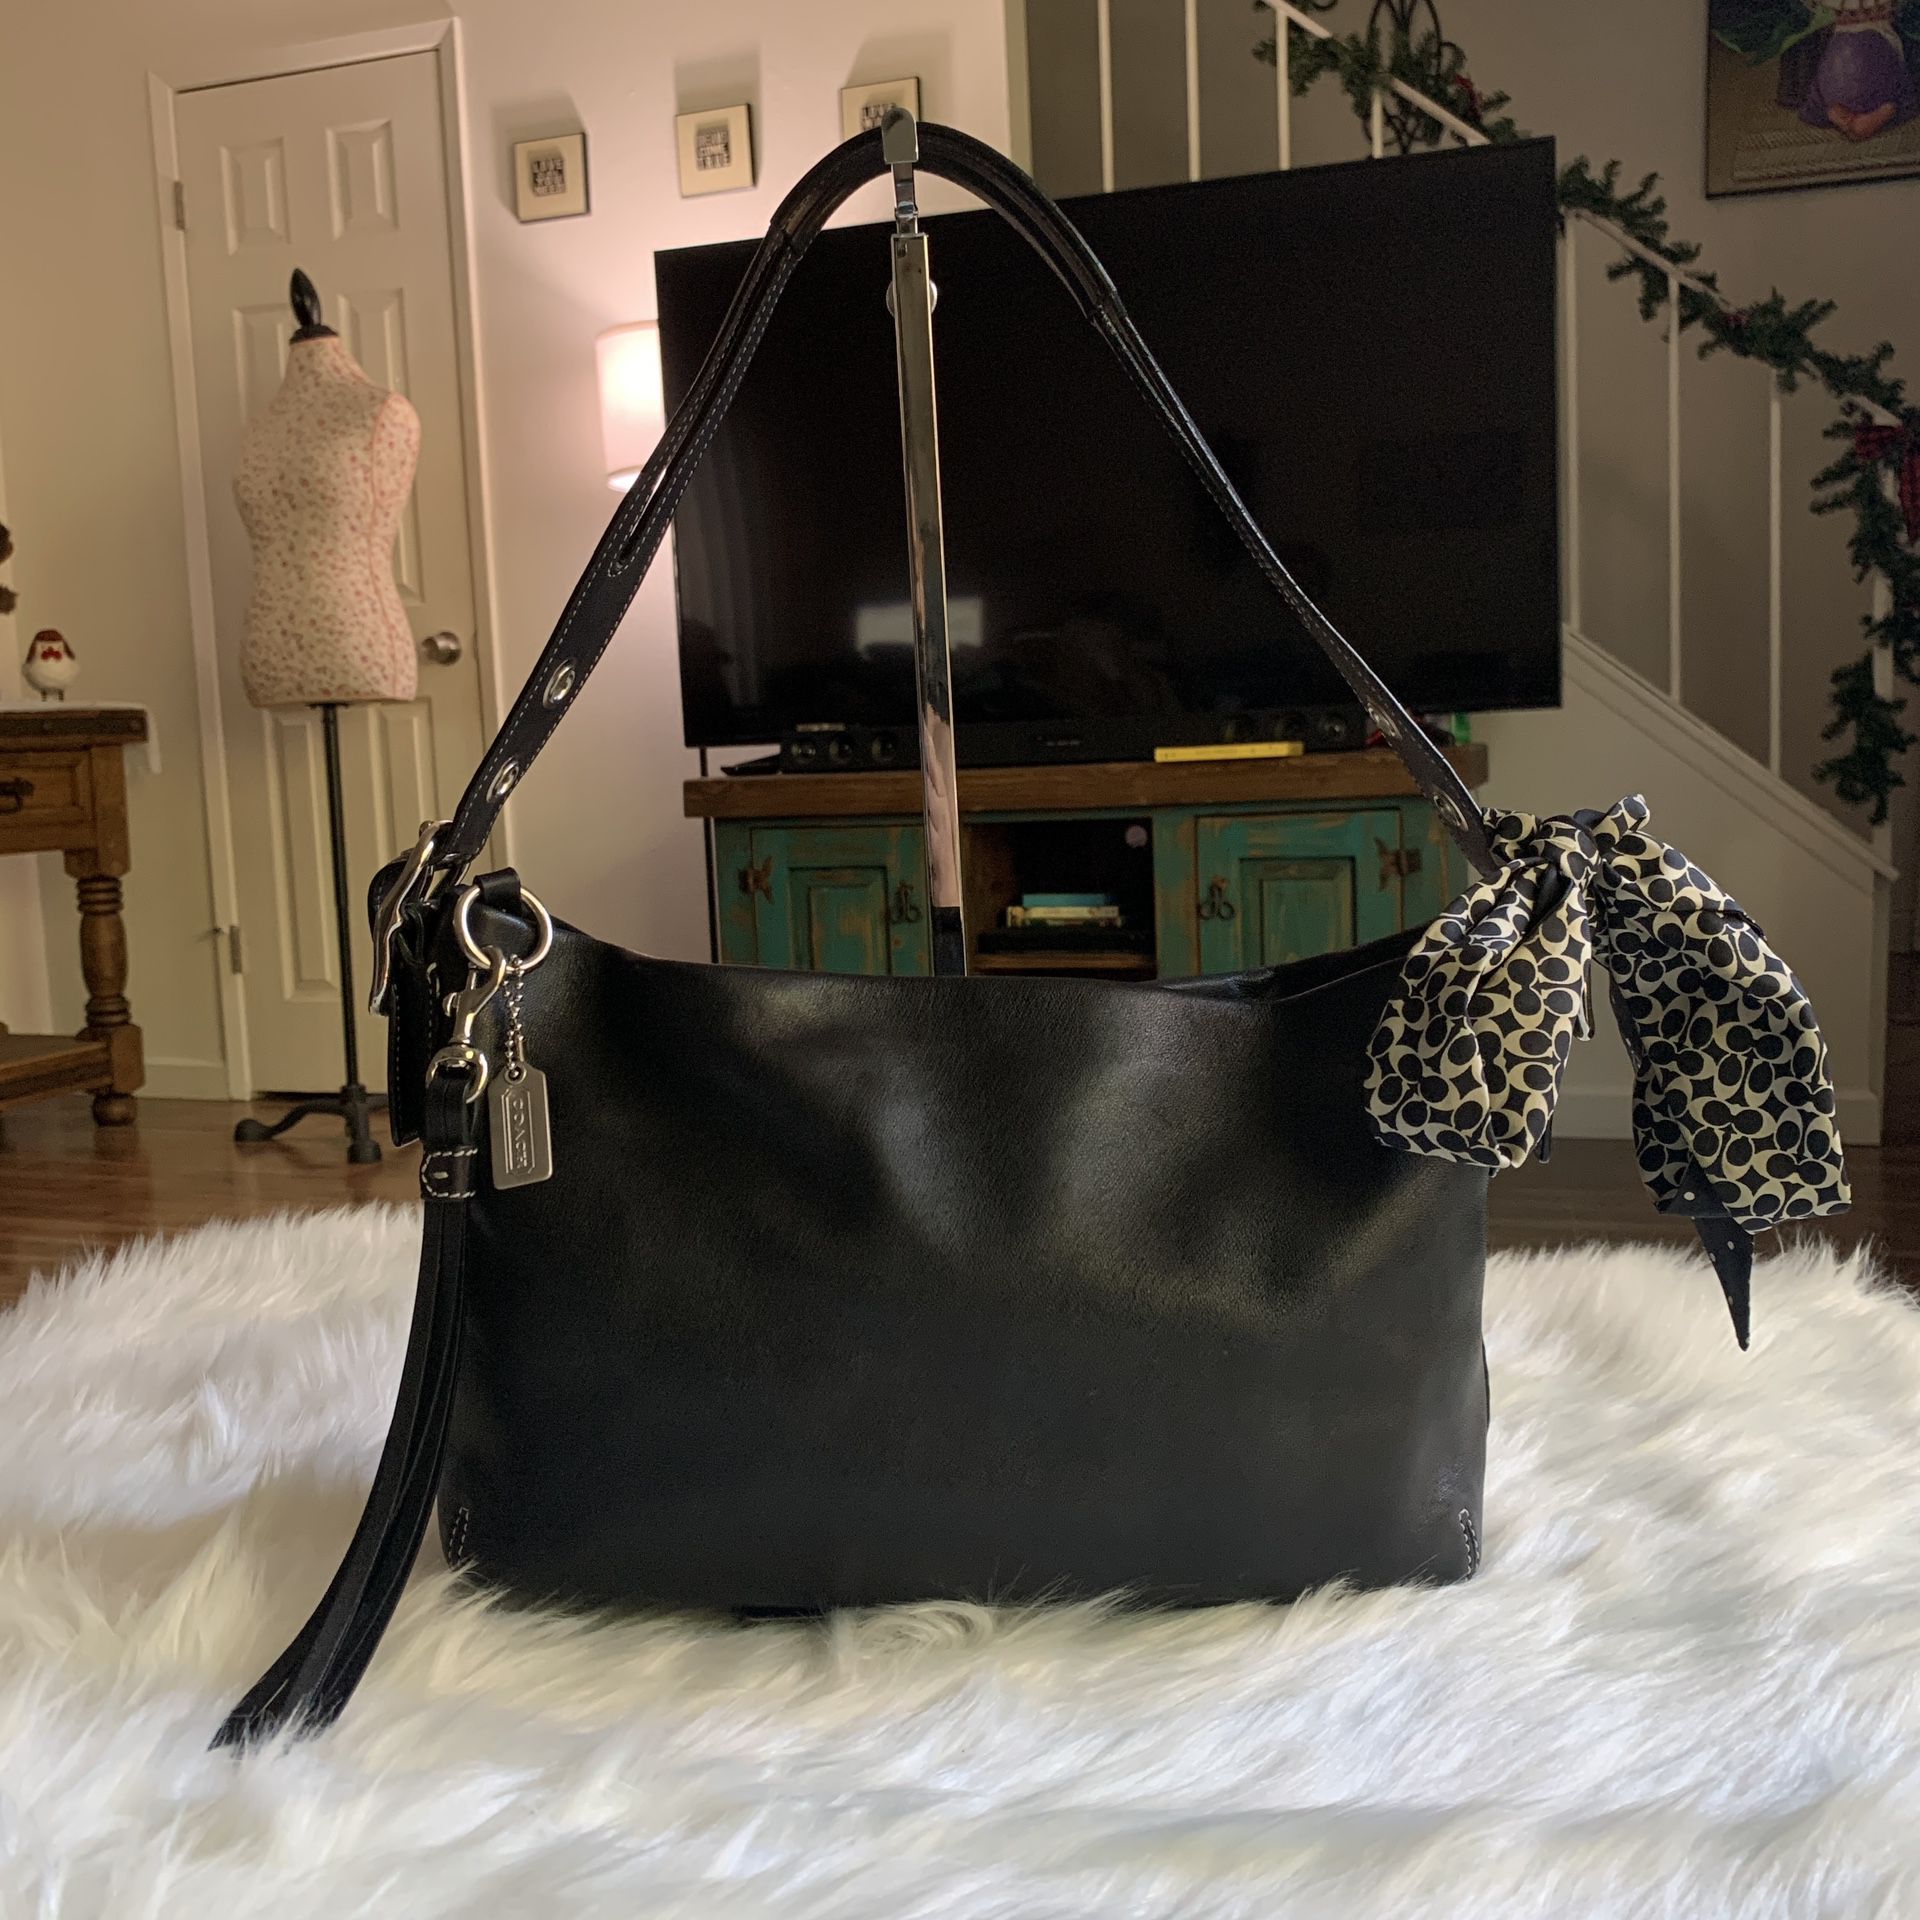 Vintage Hobo Pink Coach Bag for Sale in Sunnyvale, CA - OfferUp